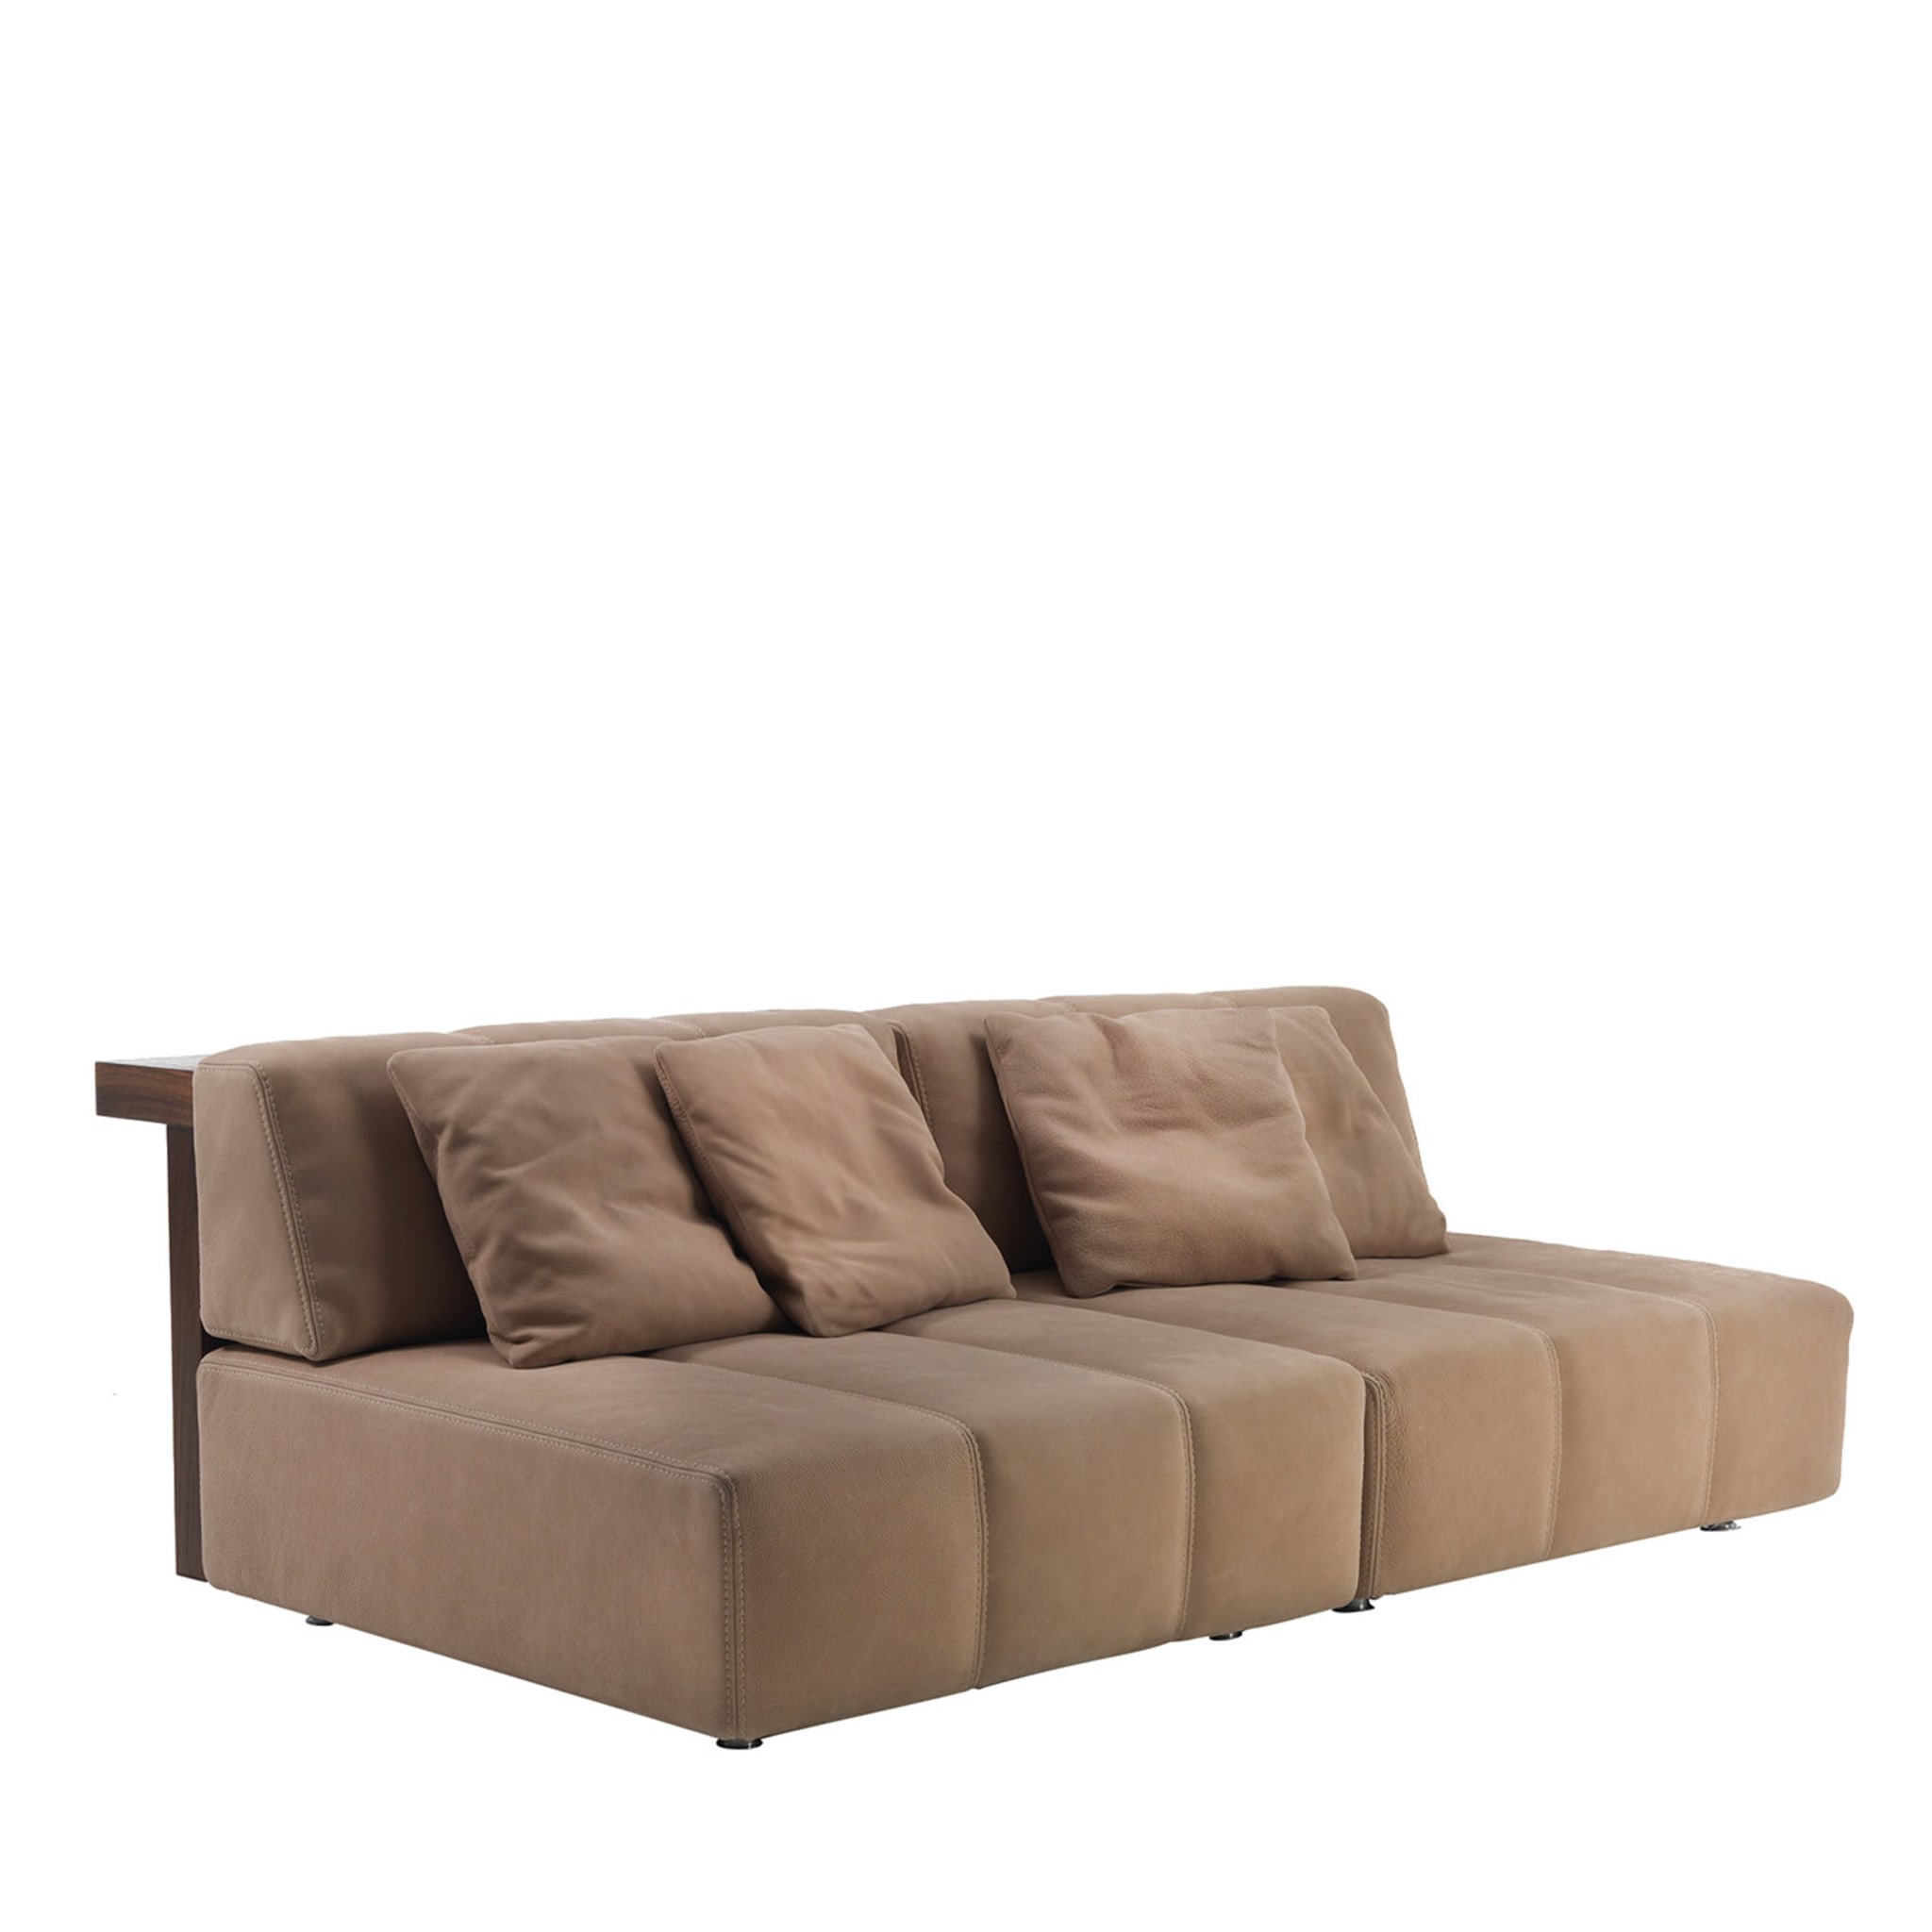 Fur Nature Brown Sofa by Jamie Durie - Main view